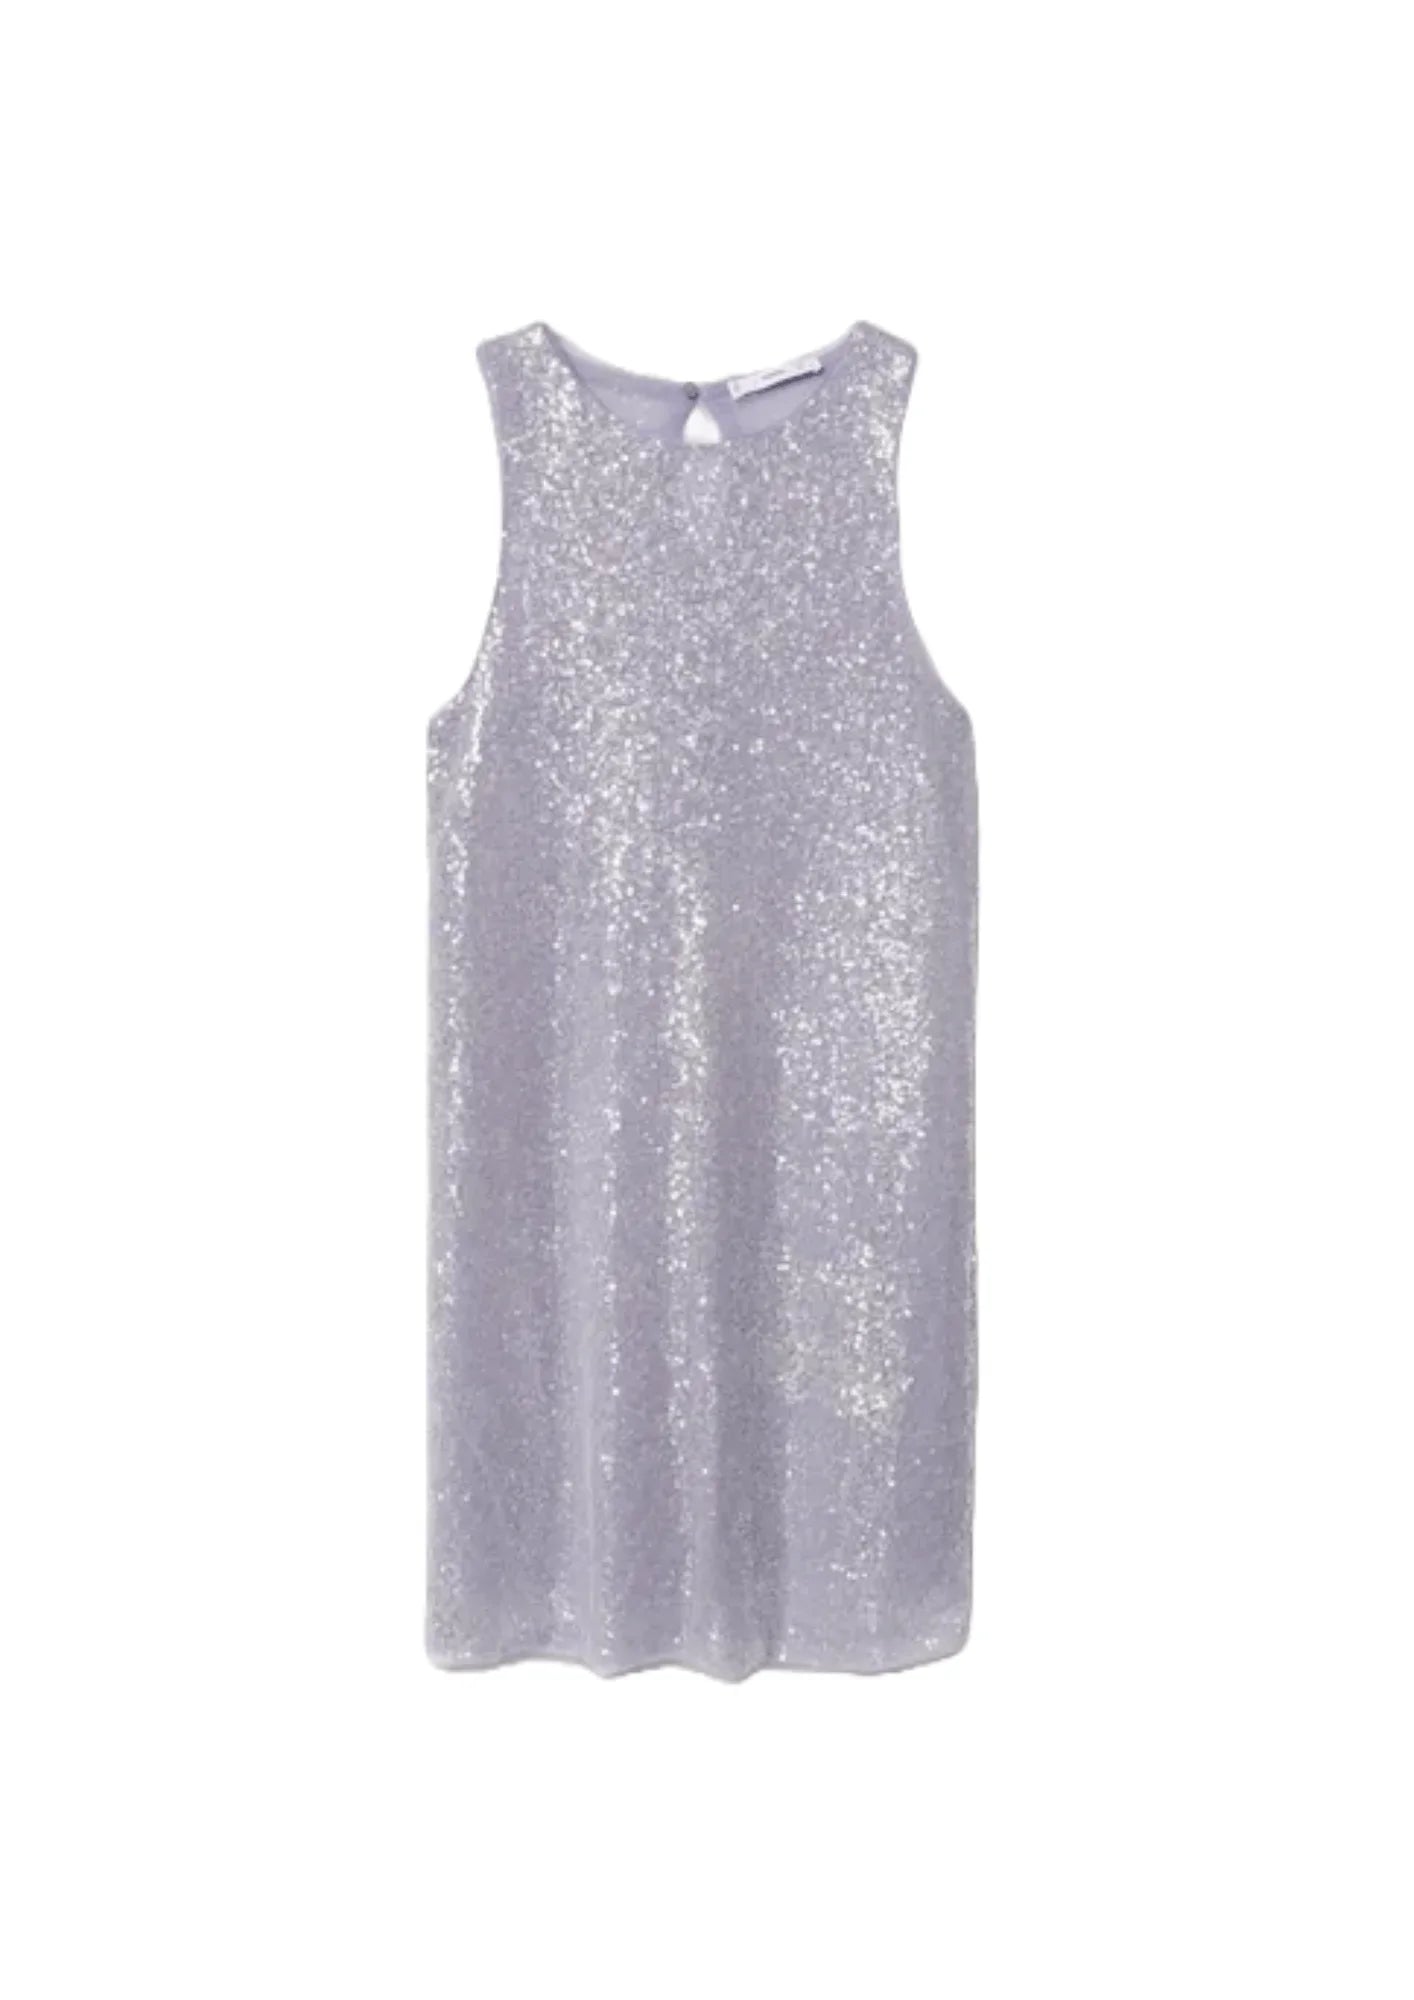 LILAC SEQUINED DRESS